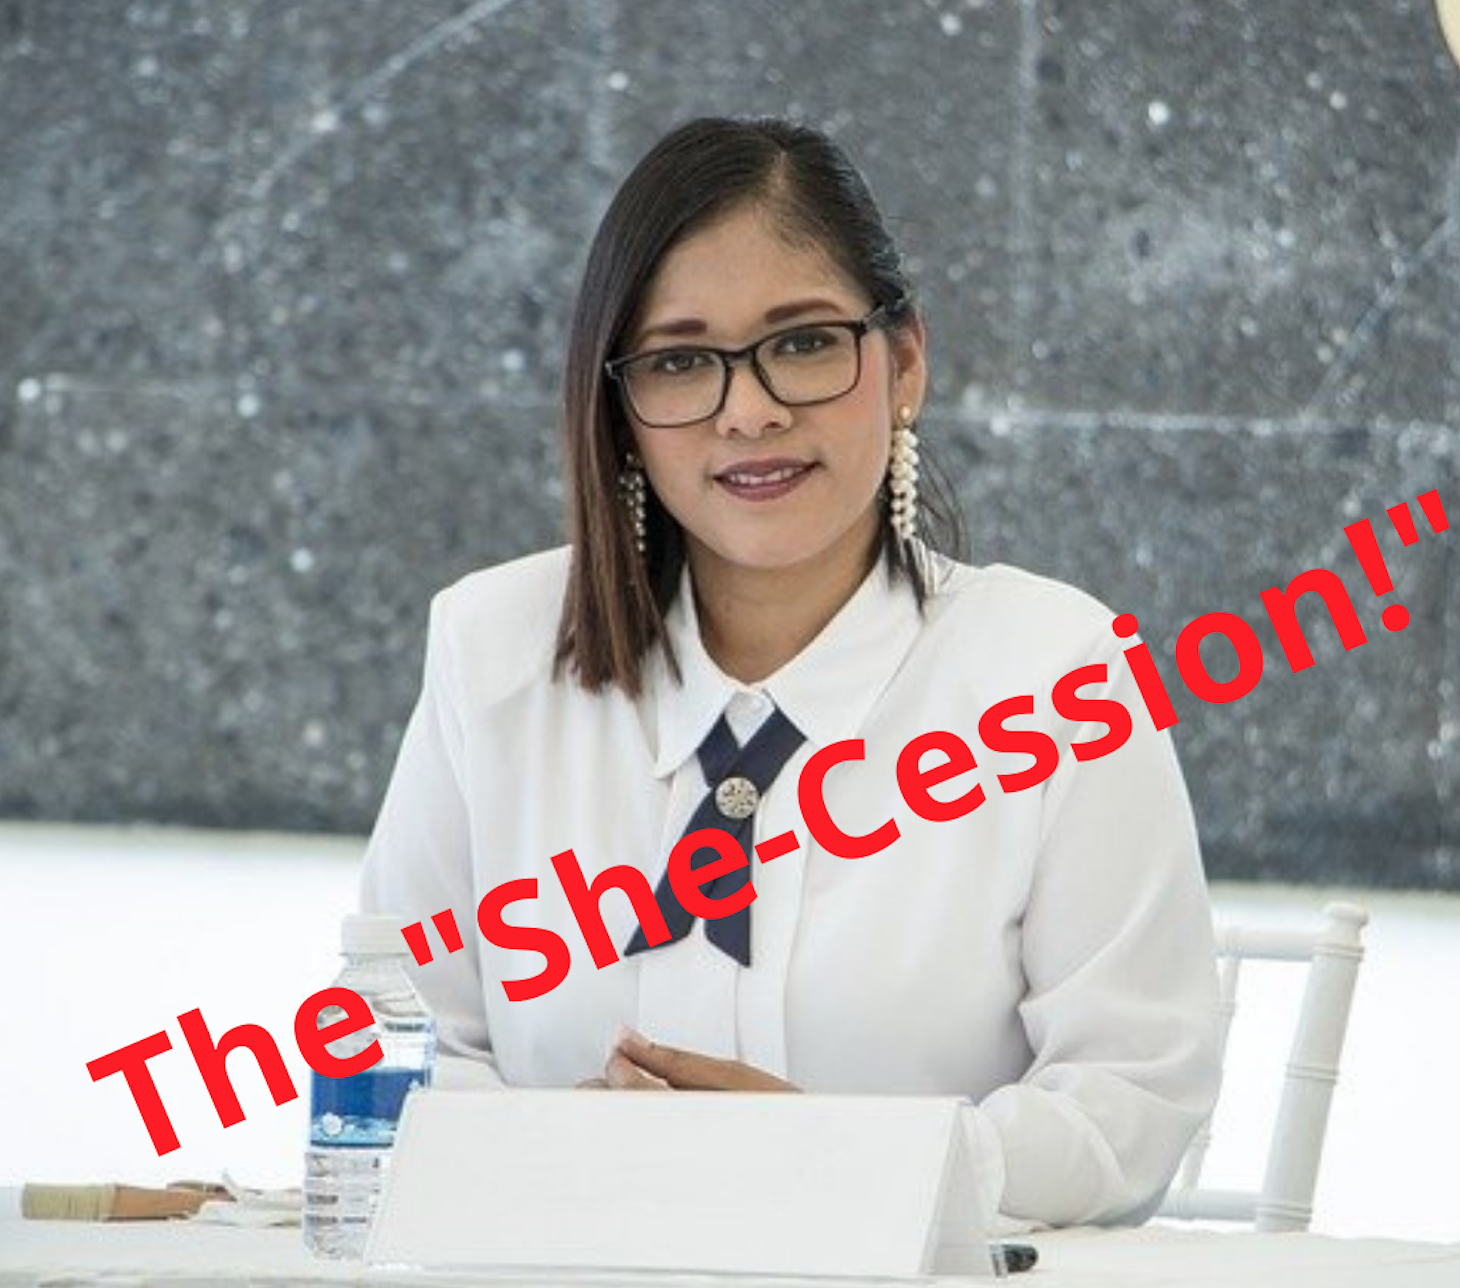 Image of a woman, likely Hispanic, in business attire with the word in red across the image saying "She-Cession"